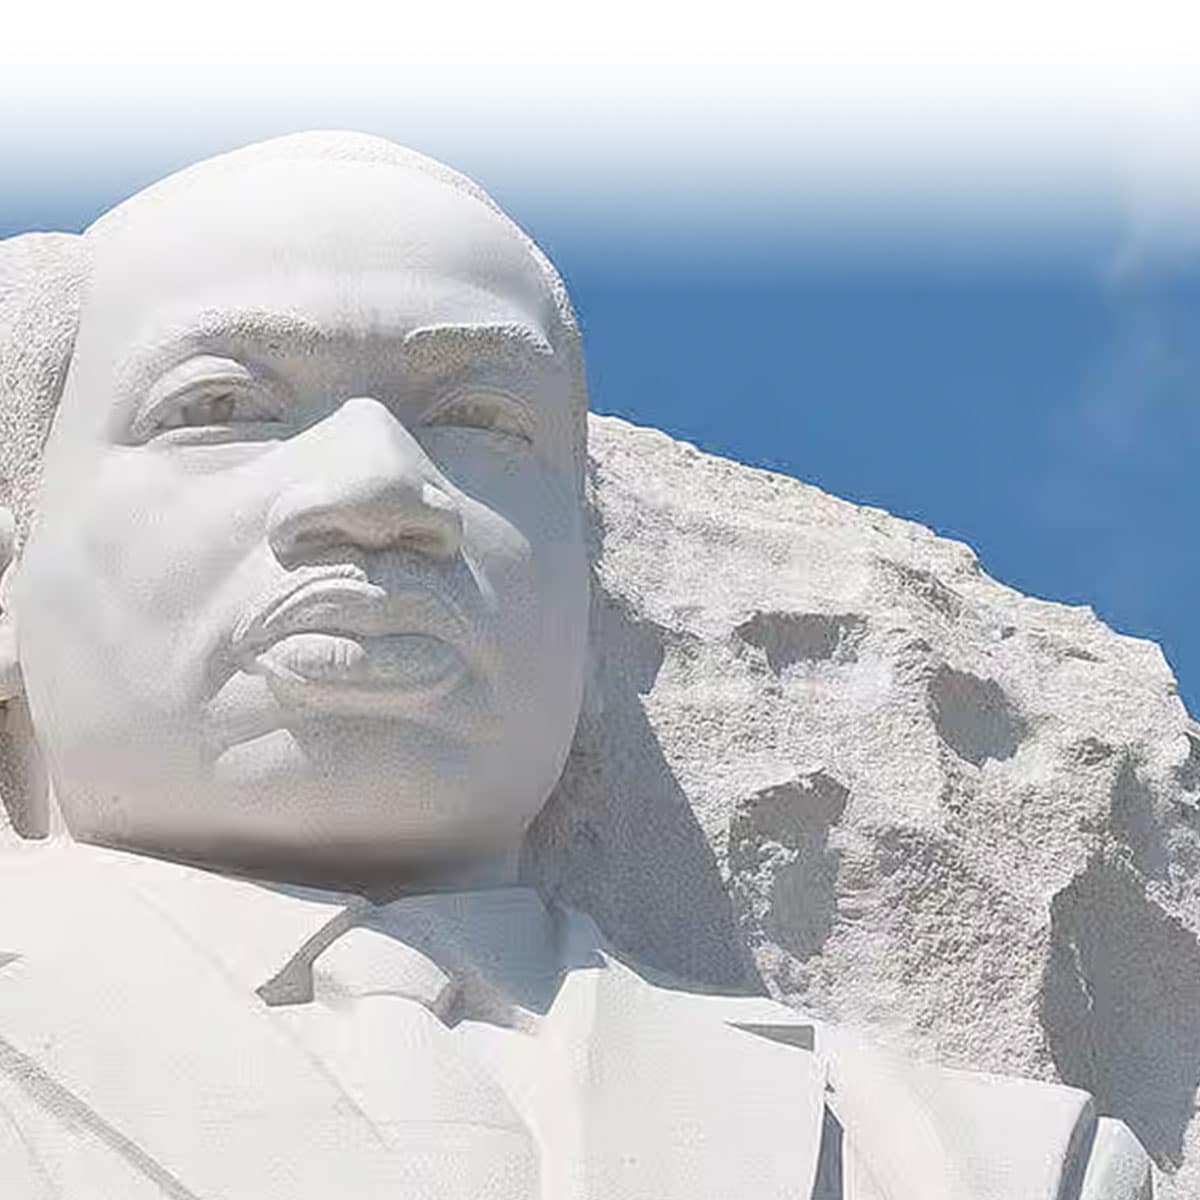 Campus will be closed in honor of Martin Luther King Jr. Day